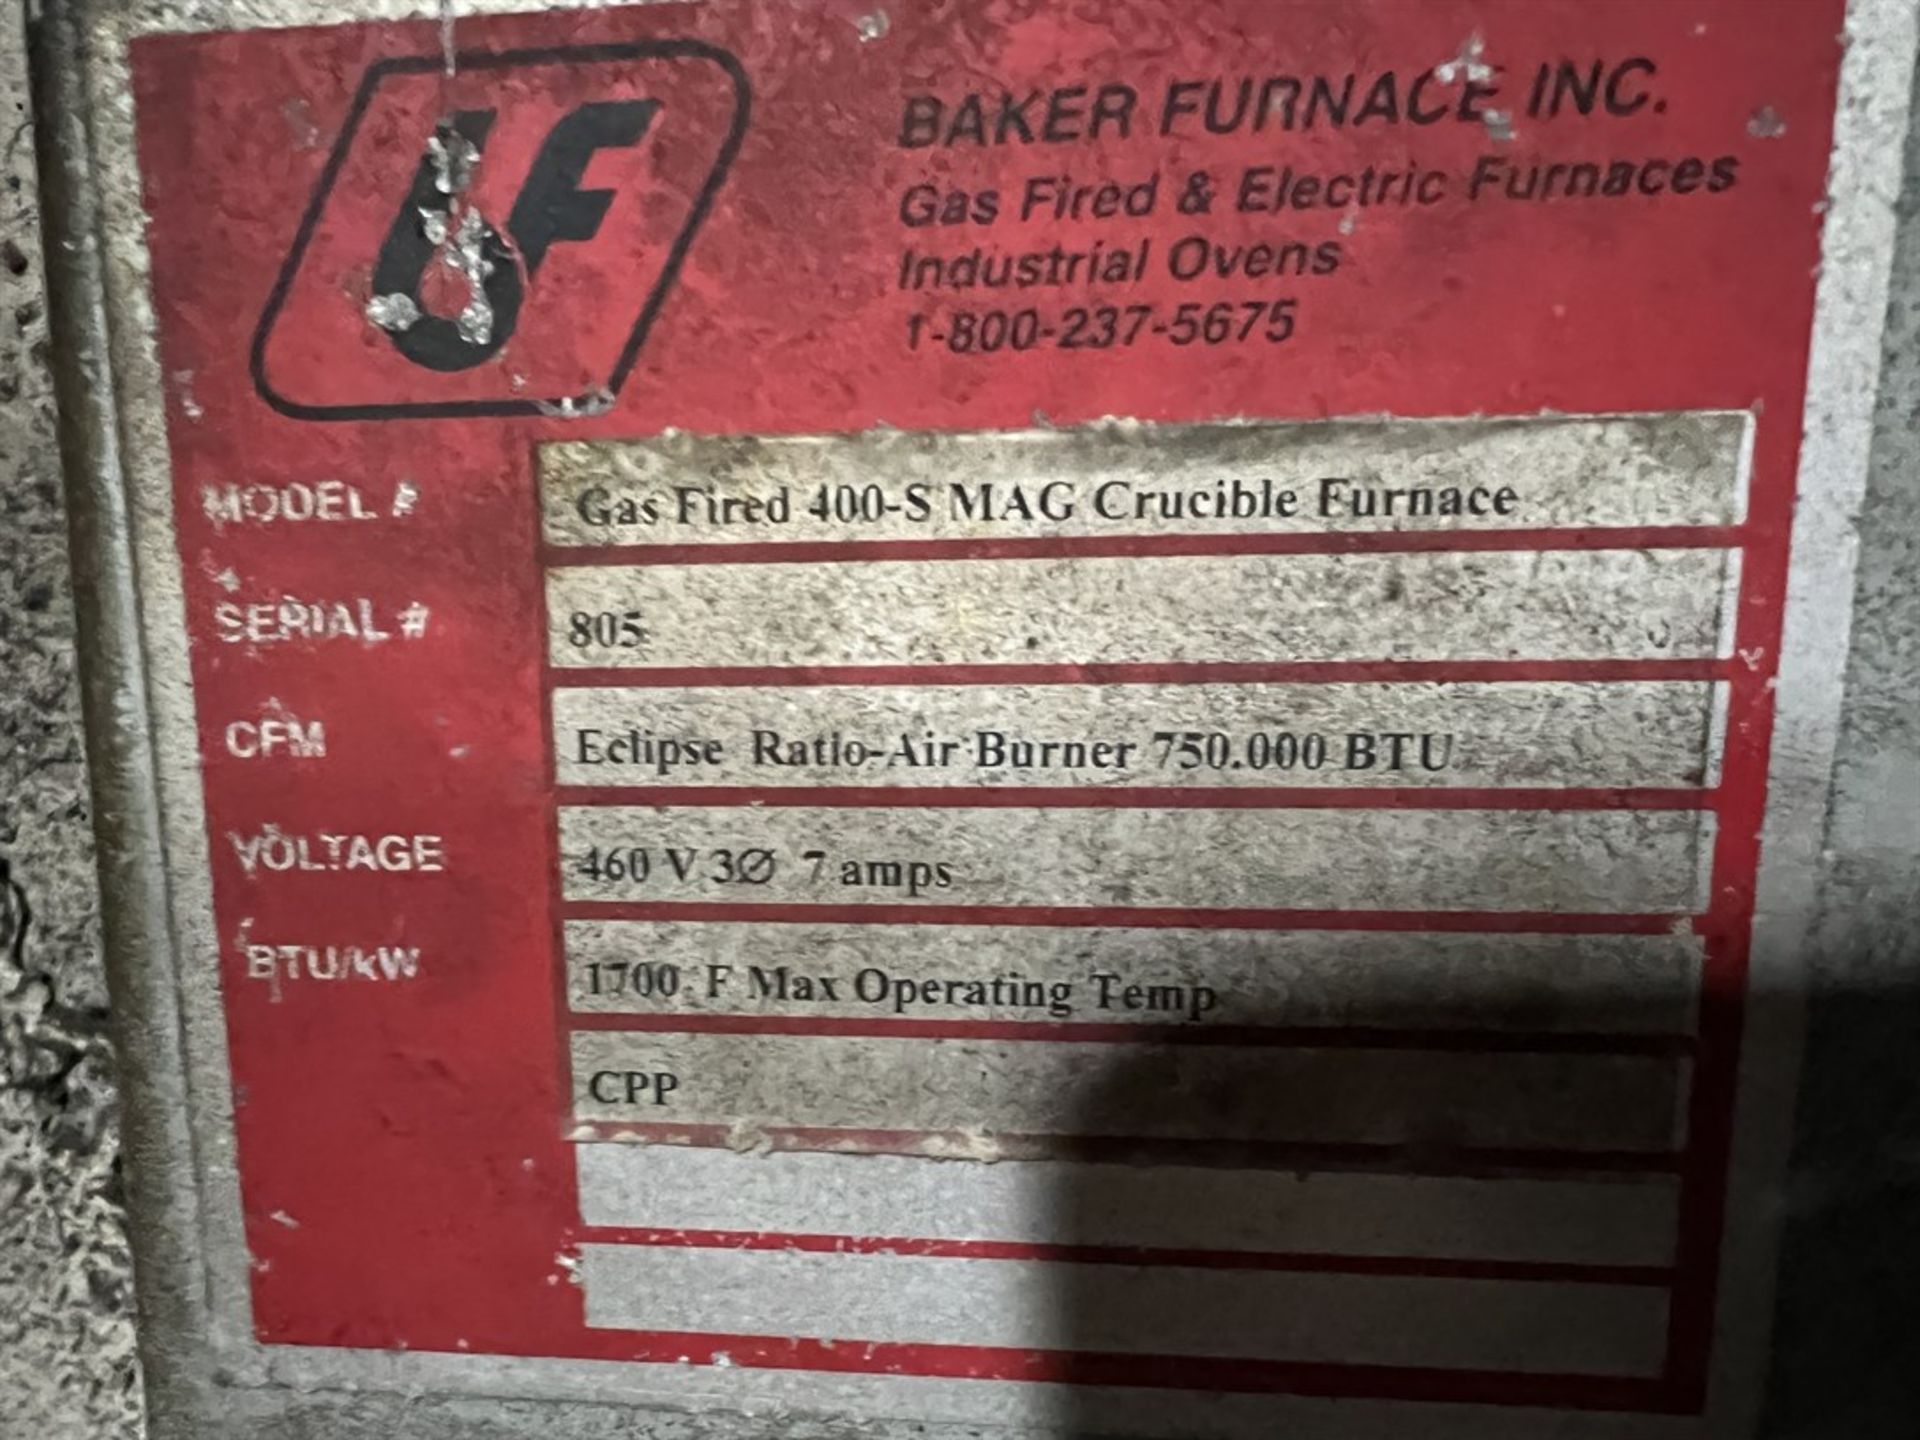 BAKER Gas Fired 400-S MAG Crucible Furnace, s/n 805, 750.000 BTU, 1700 Degrees F Max Operating Temp - Image 7 of 7